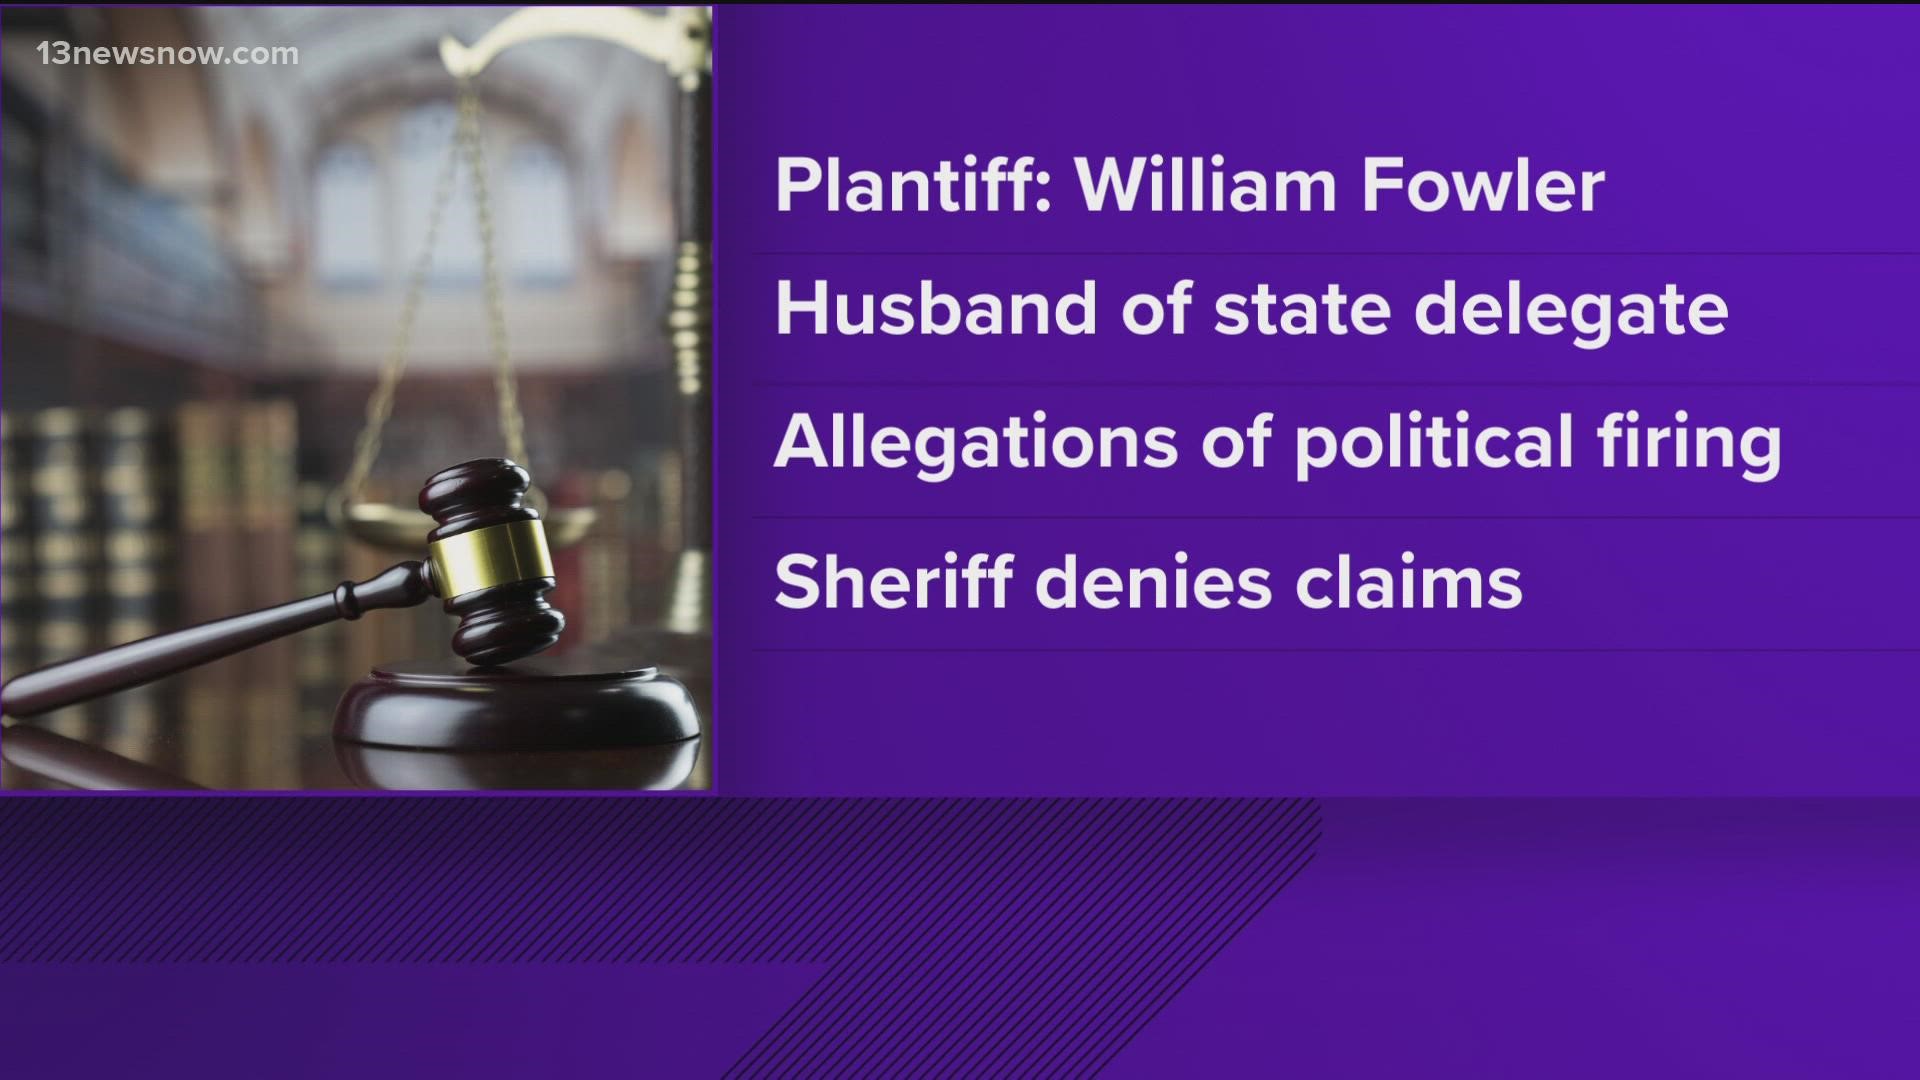 A former sergeant is suing the Virginia Beach sheriff for "wrongful termination". Lawyers for William Fowler filed the federal lawsuit this week.